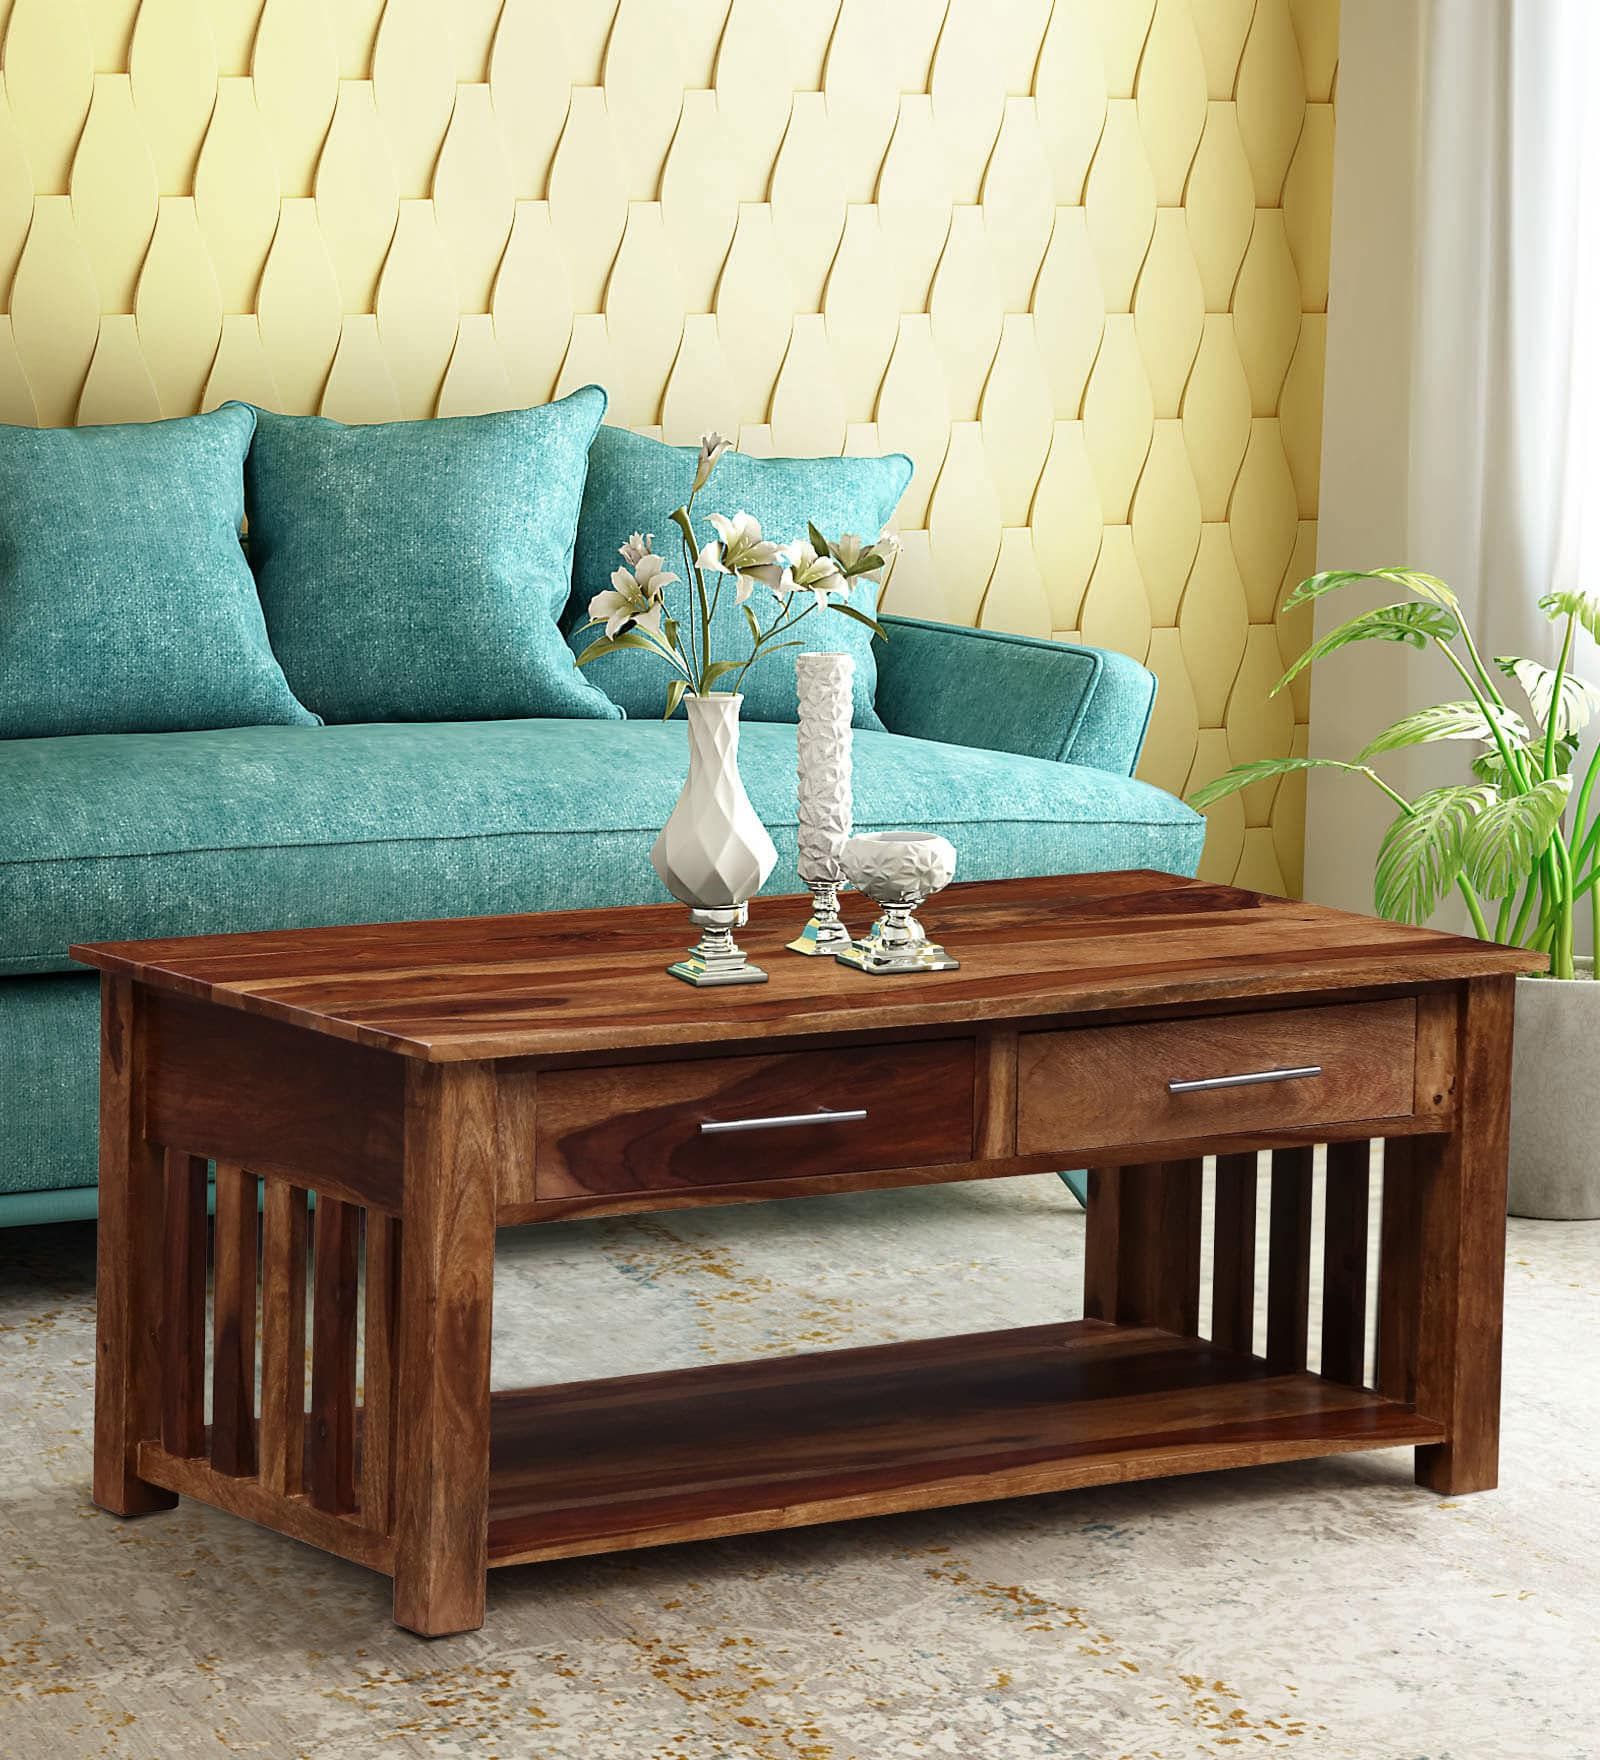 Large Sheesham Solid Wood Coffee Table In Rustic Teak Finishmft In Coffee Tables With Solid Legs (View 9 of 15)